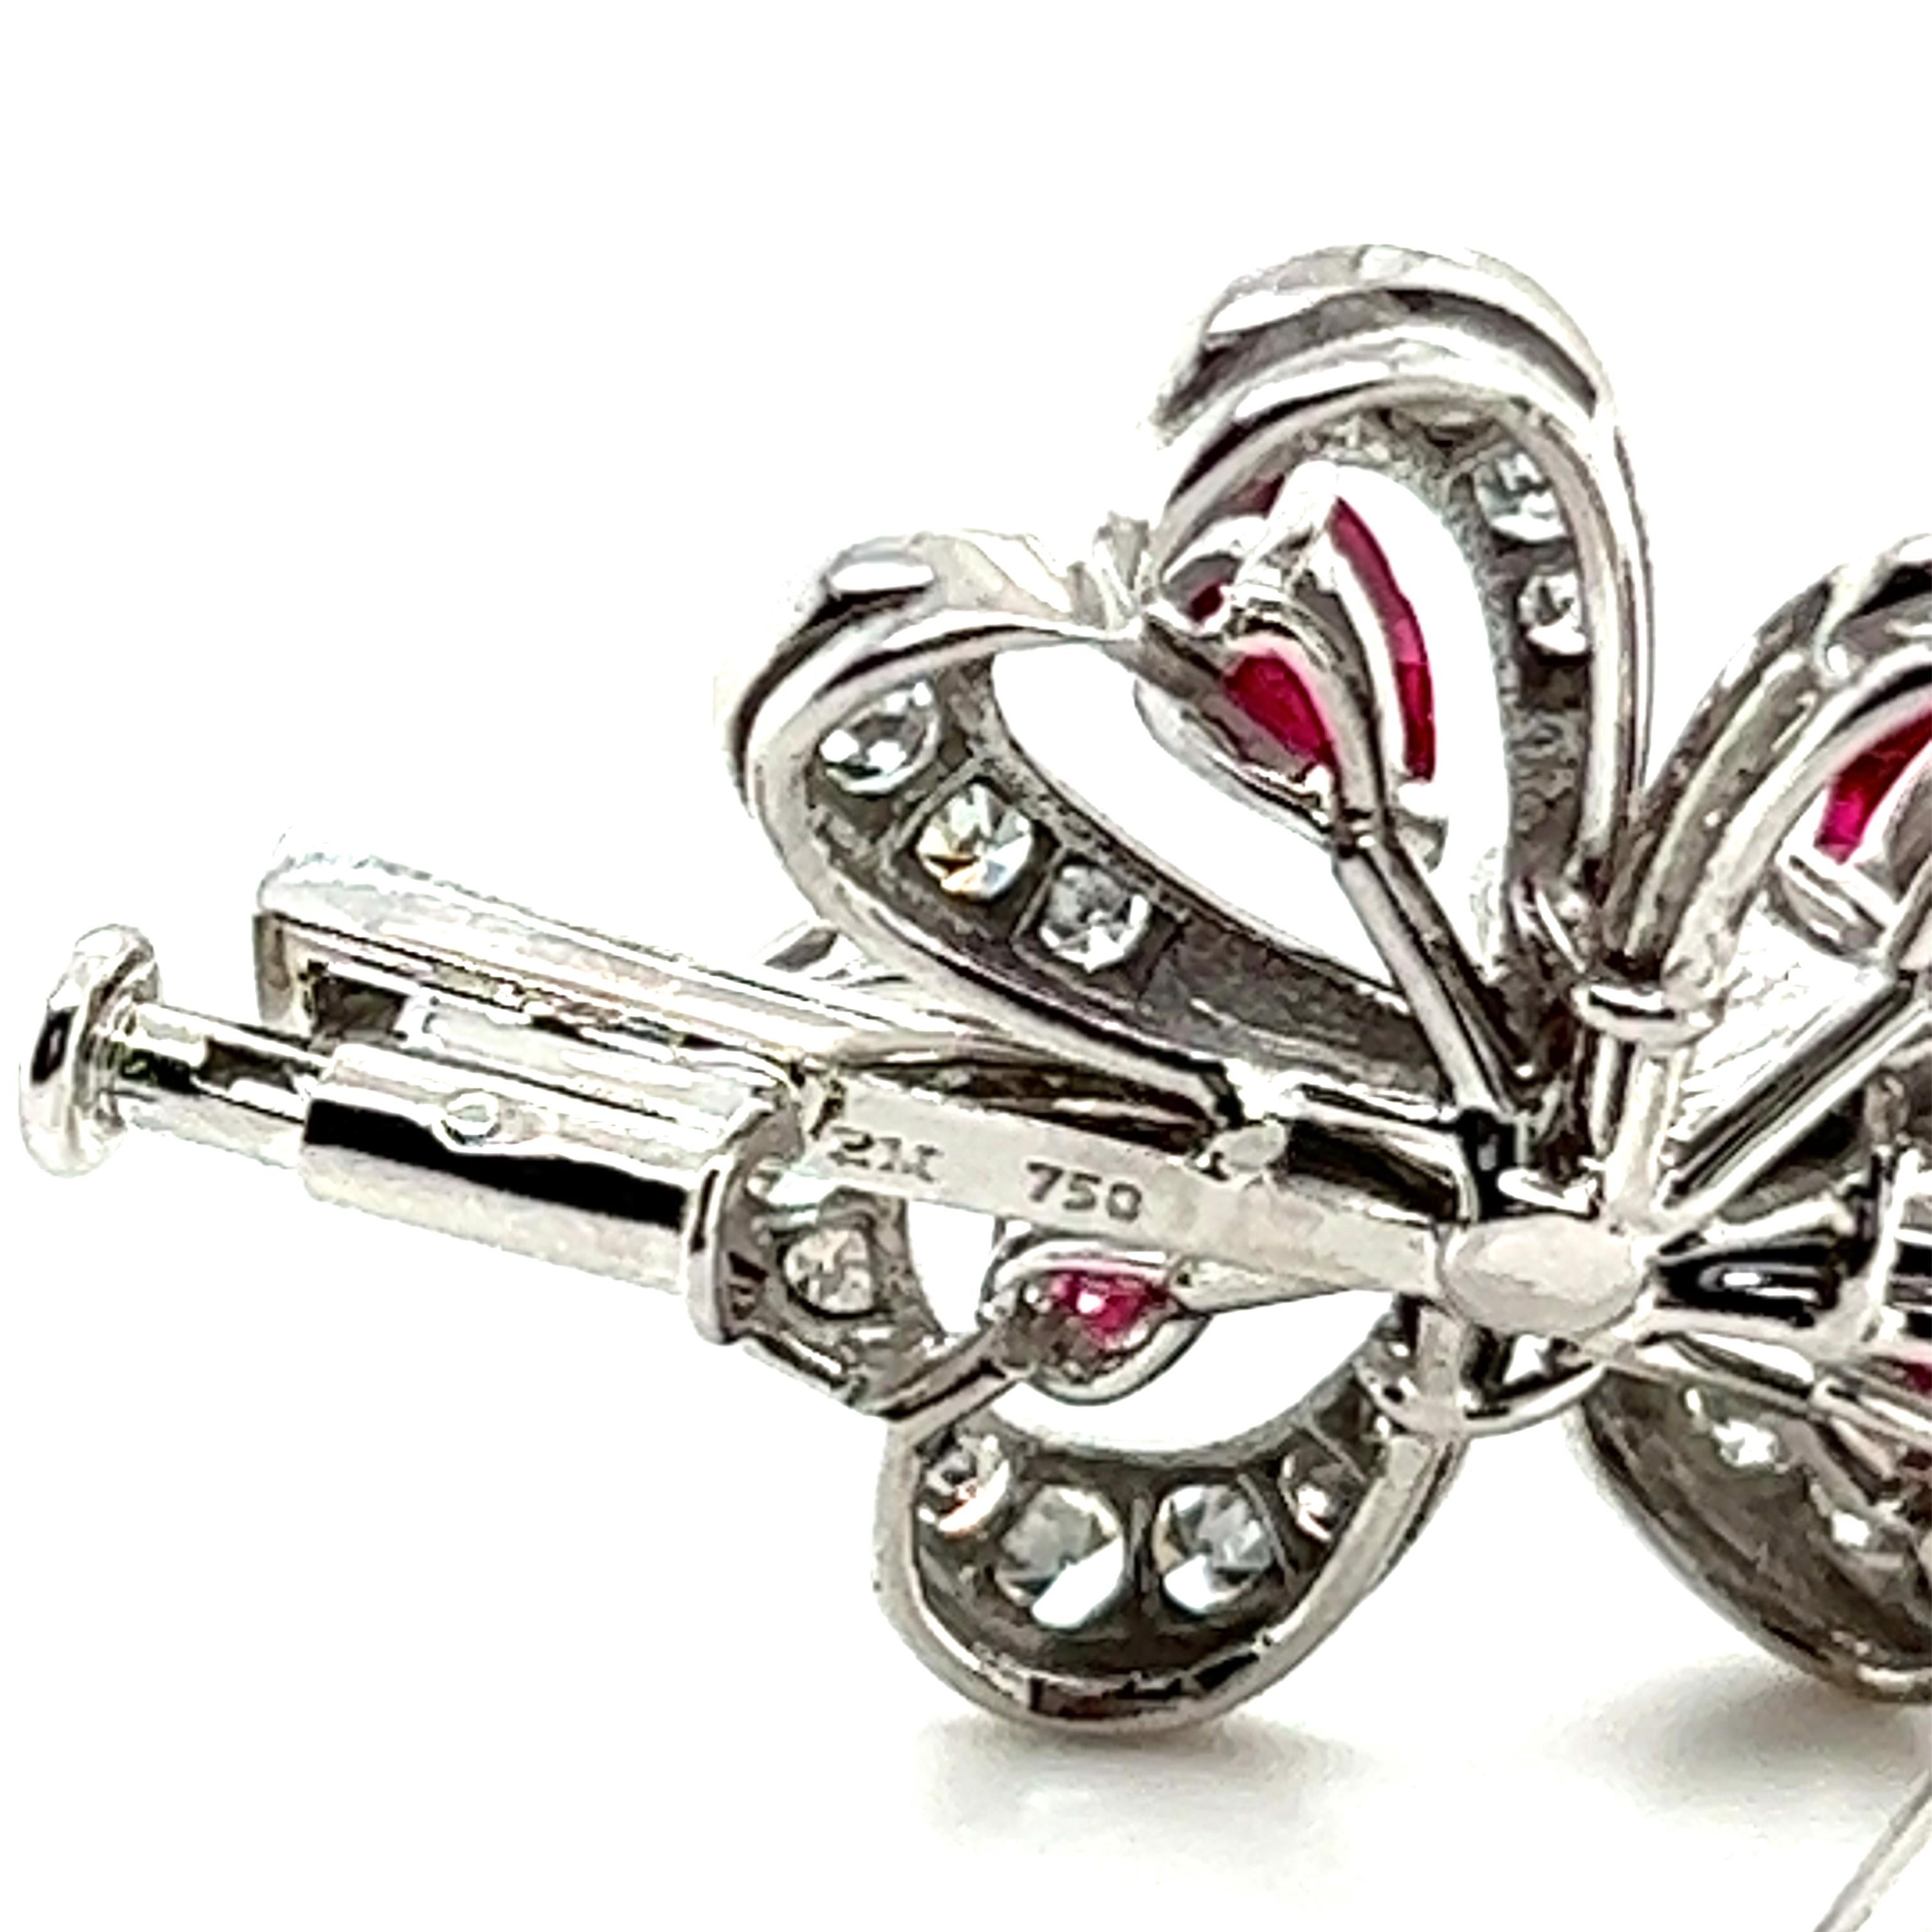 Women's or Men's Clover Brooch with Rubies & Diamonds in 18 Karat White Gold by Meister